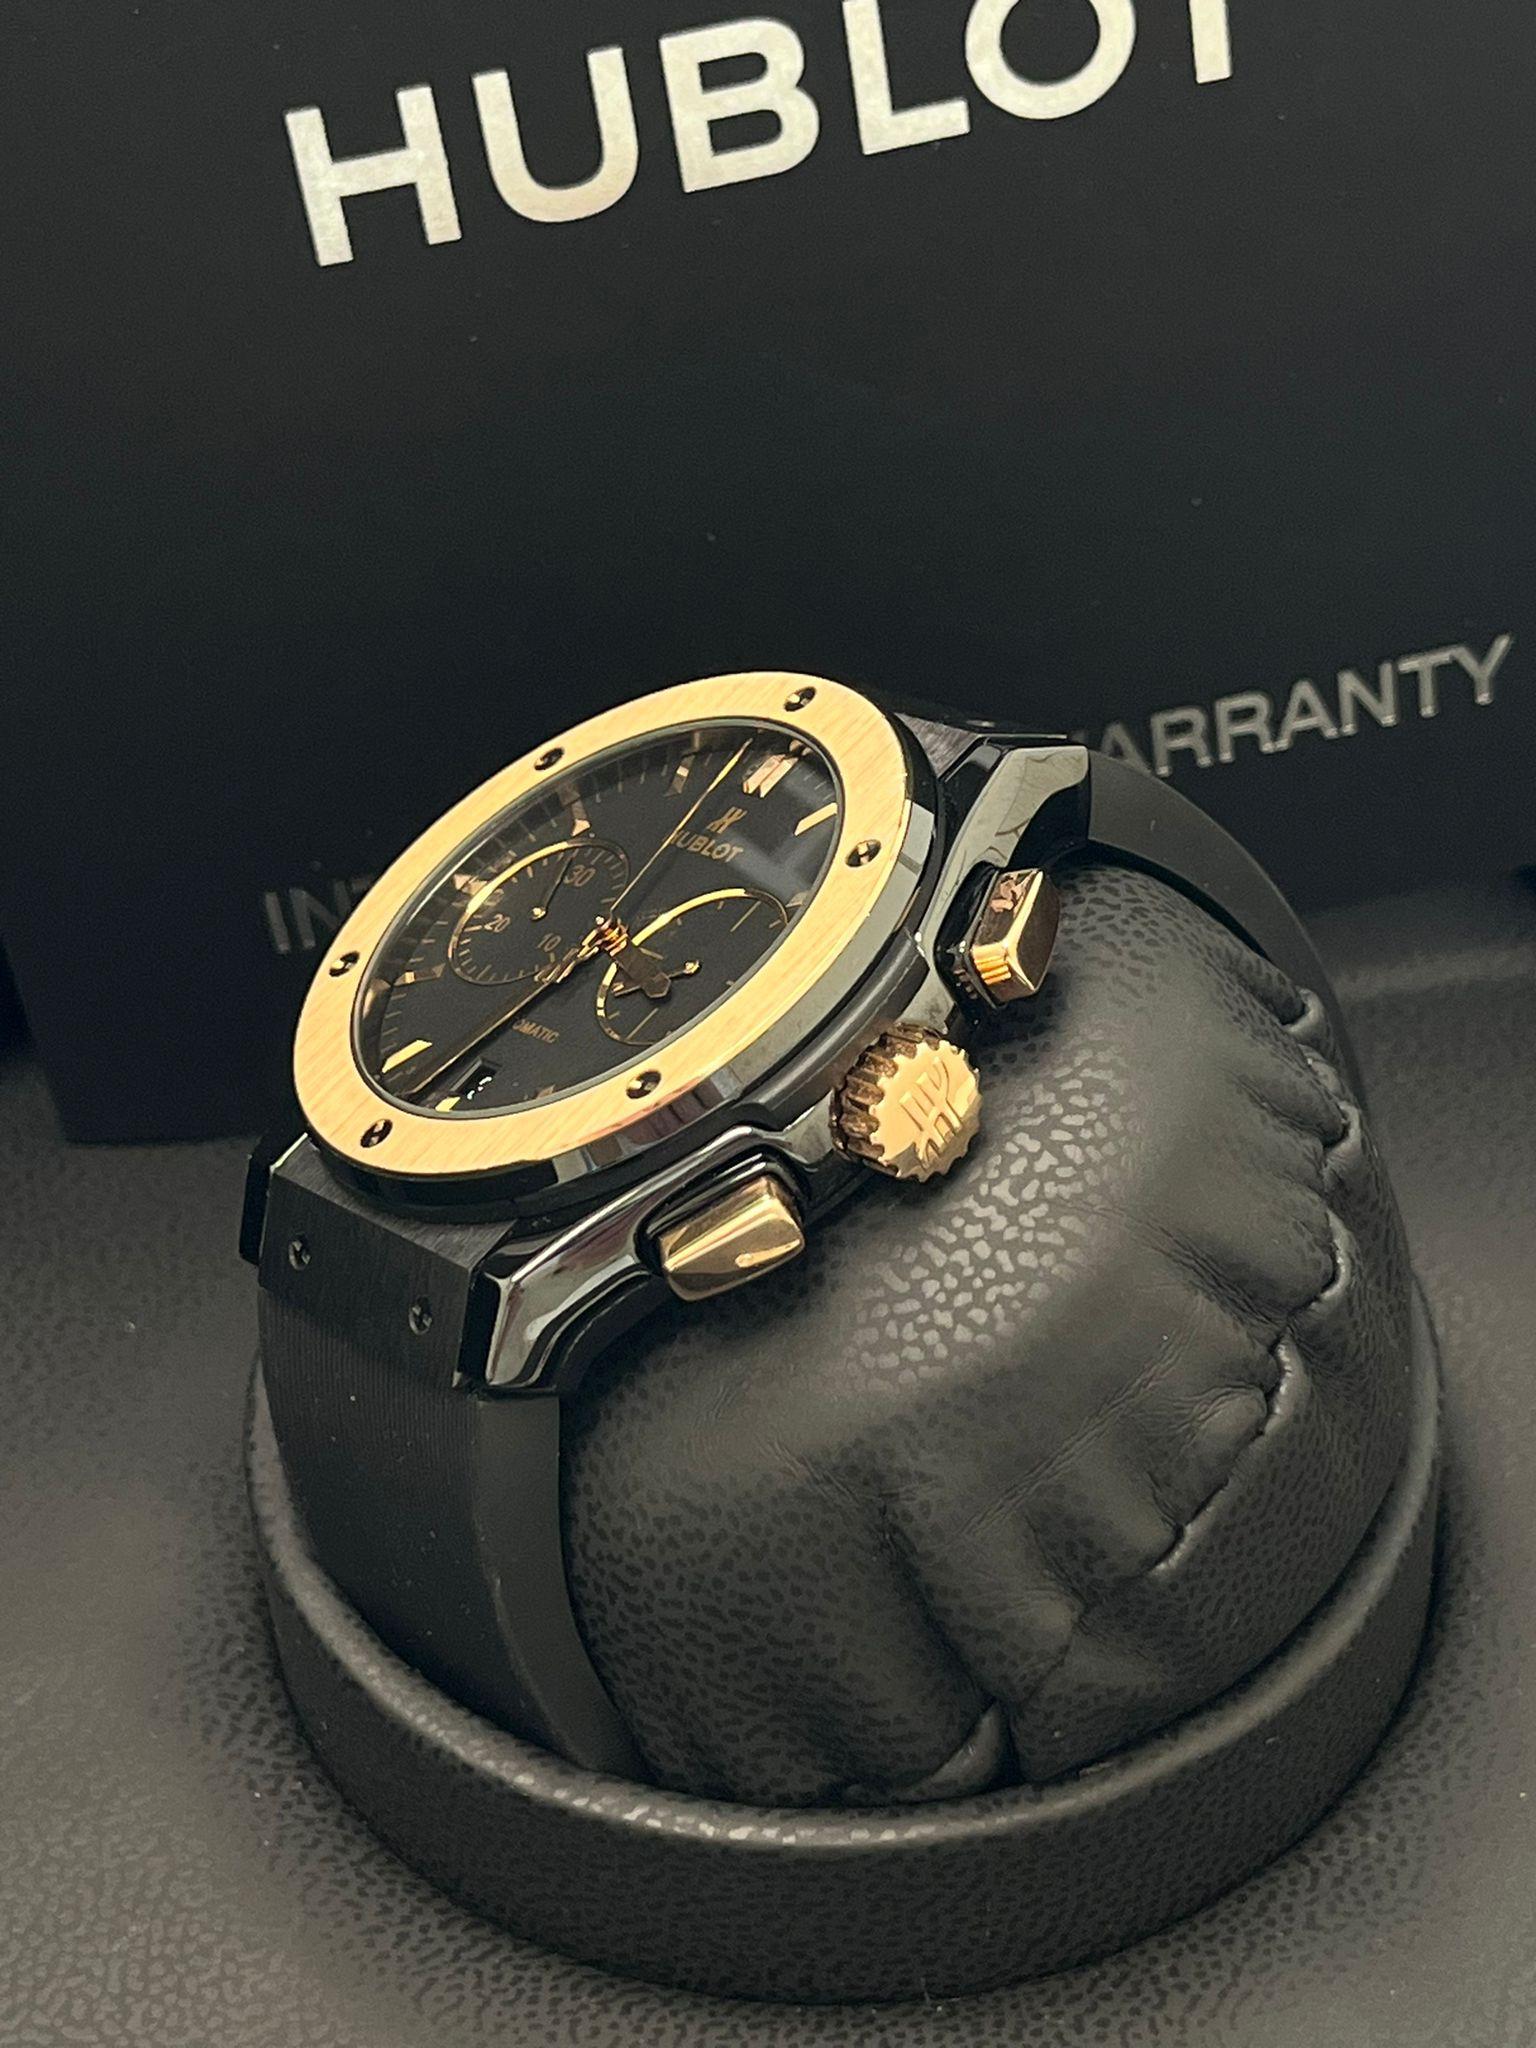 Hublot Classic Fusion Chronograph Ceramic King Gold 45mm Watch 521.CO.1181.RX For Sale 8